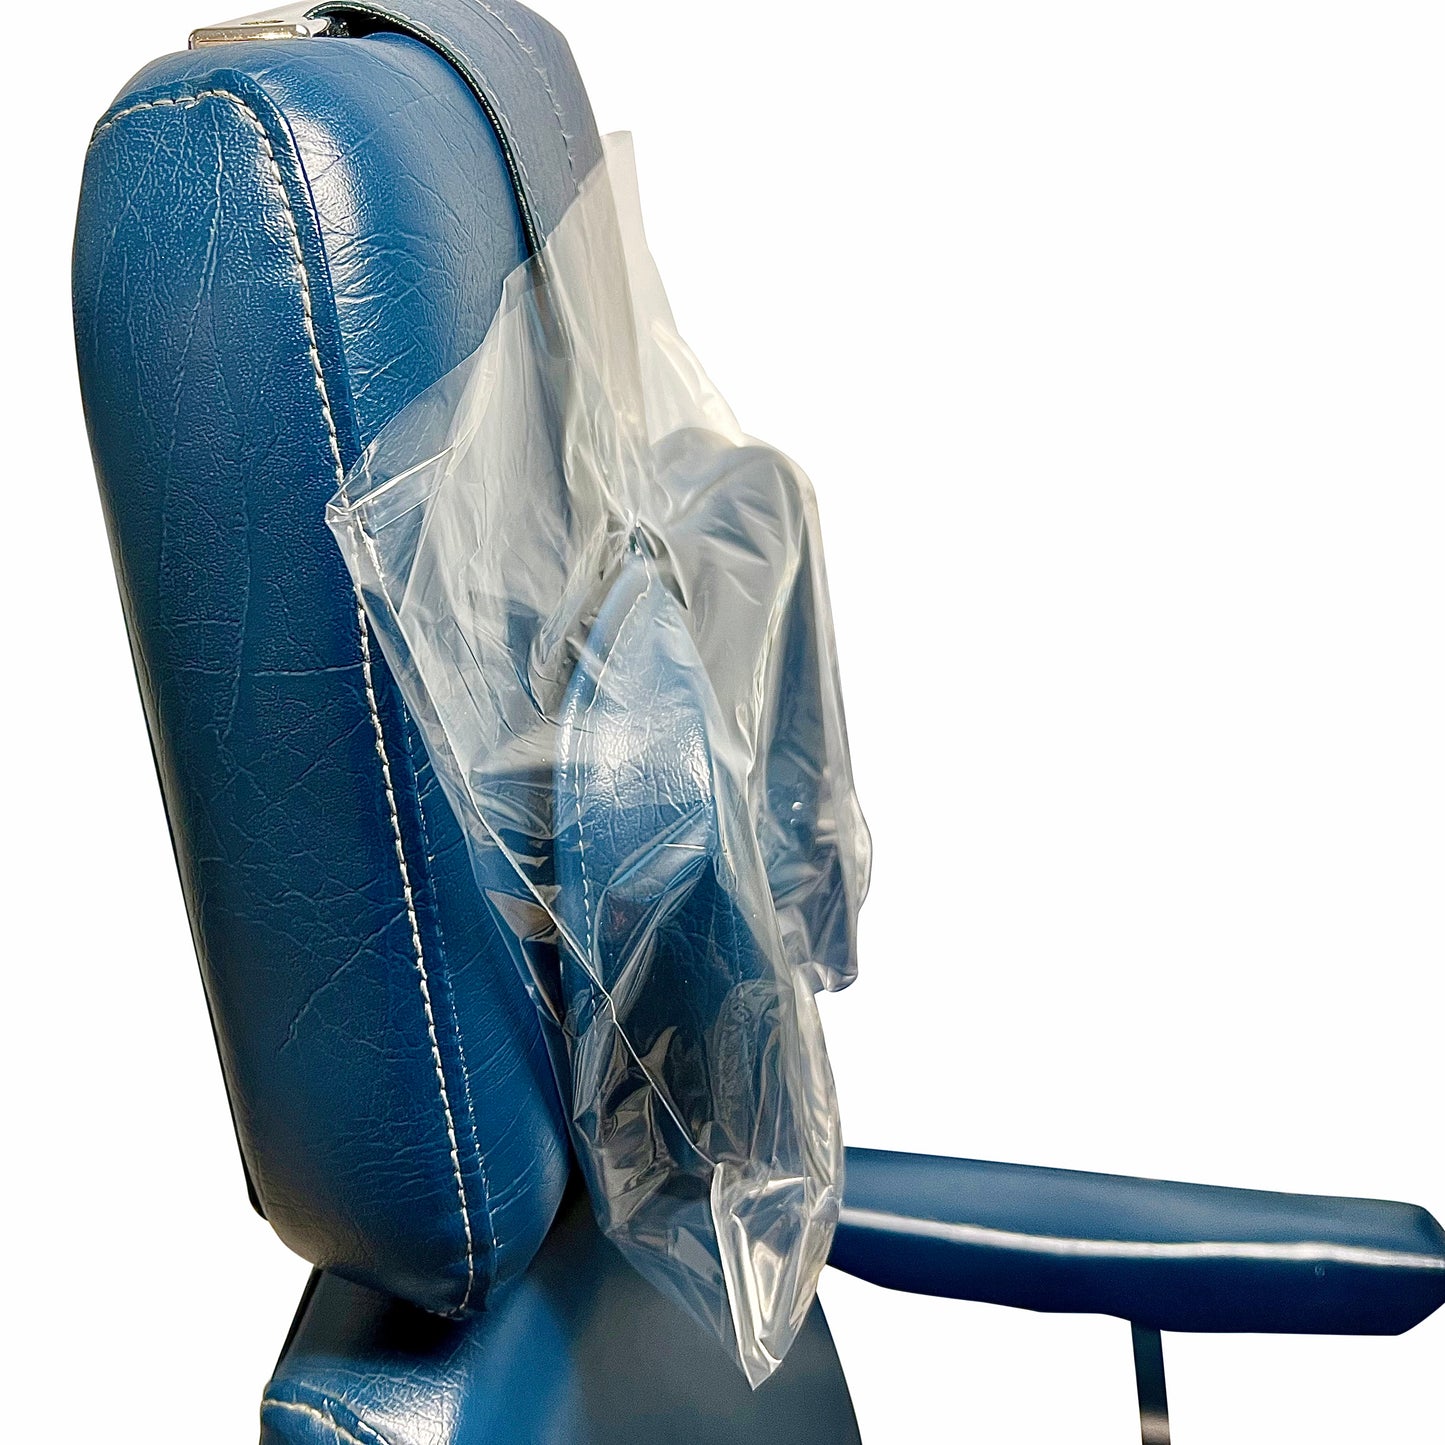 Disposable Clear Plastic Chair Cover, Head Rest Cover, Waterproof Plastic Covers for Dental Chairs, Tattoo Chair (Plastic Head Rest Sleeve (250 pcs/Box)